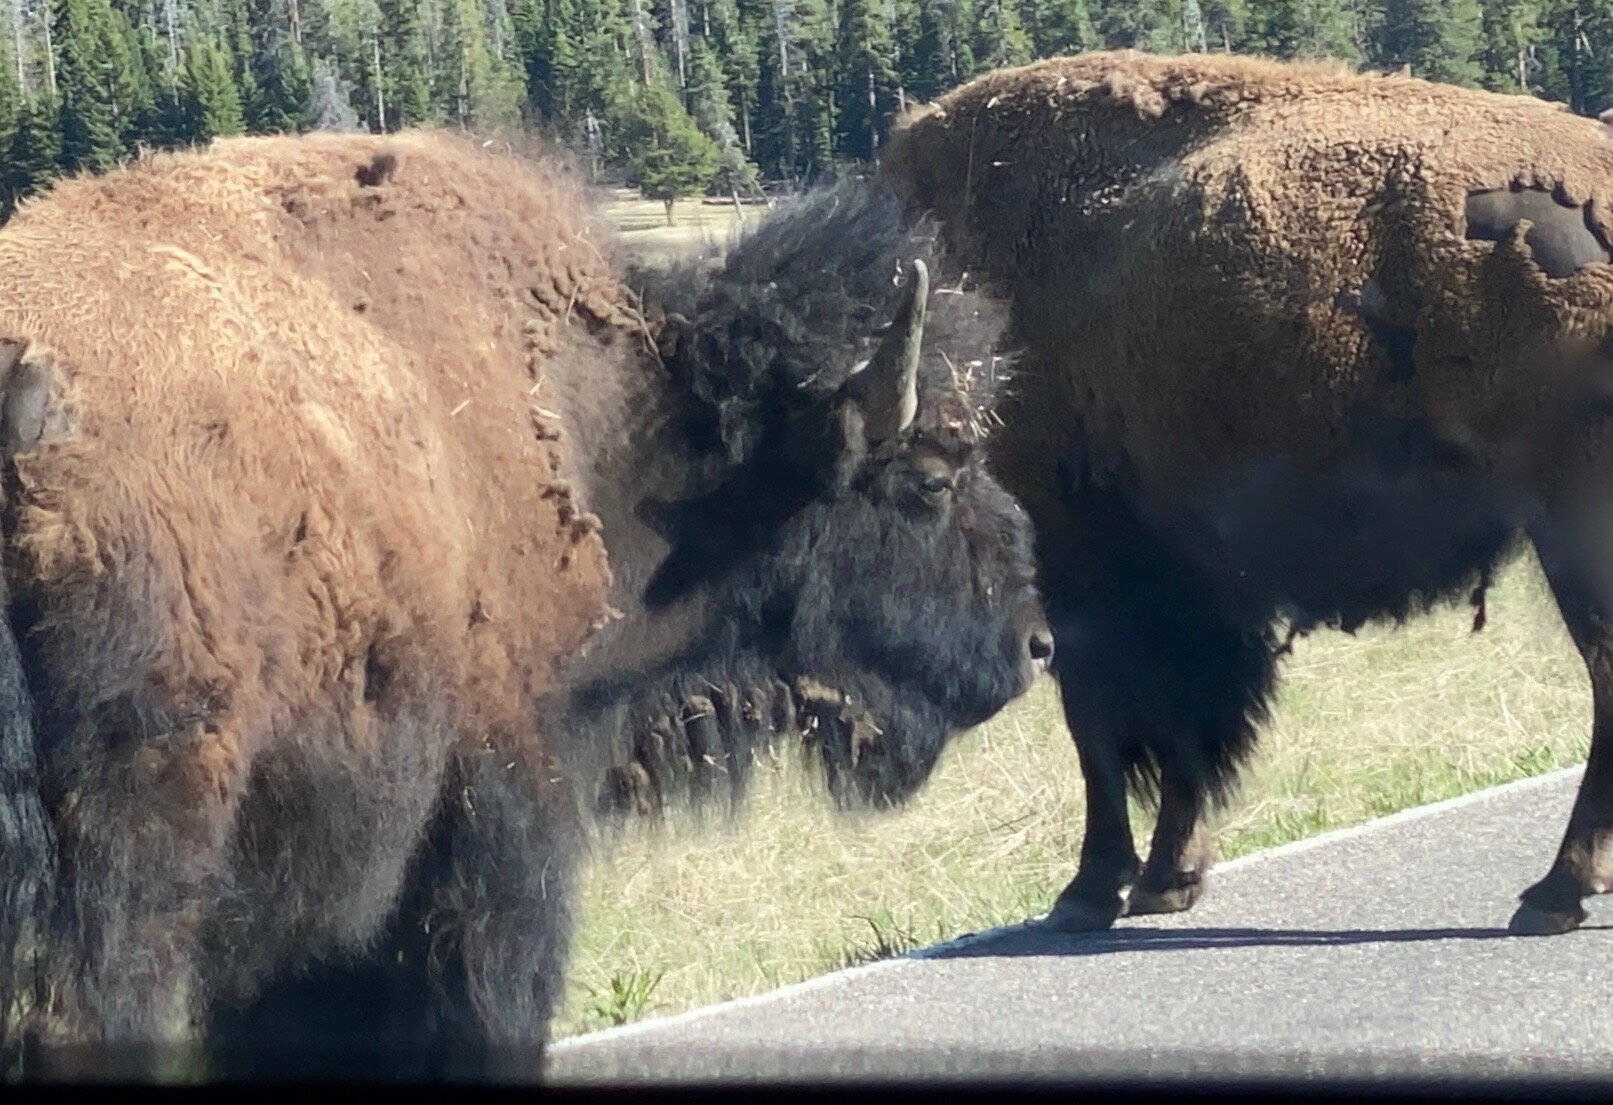 I’m pretty sure bison are my spirit animal.  This one has mastered exactly what my morning face looks like when I first wake up!  Photo by Karen Boudreaux, May 29, 2021